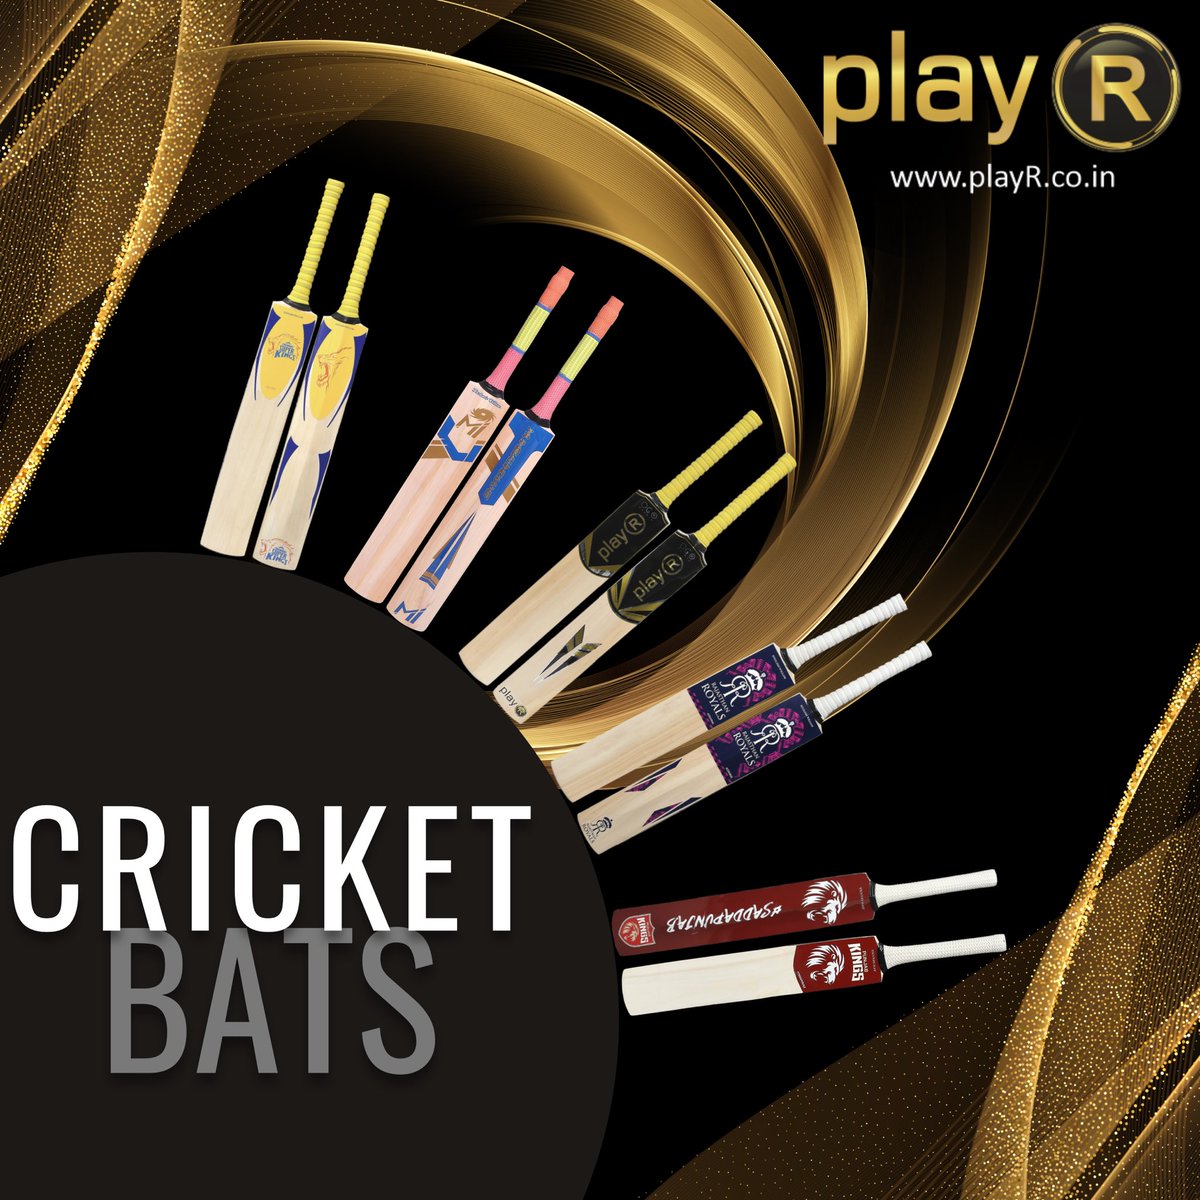 Cricket is more than a game, it's a passion. Embrace it with playR bats. #LoveCricket

#cricket #cricketbats #crickettraining #cricketgame #cricketcommunity #cricketheroes #cricketfuture #cricketnation #cricketchallenge #cricketpride #icc #cwc #cricketworldcup #CRICKETplayR